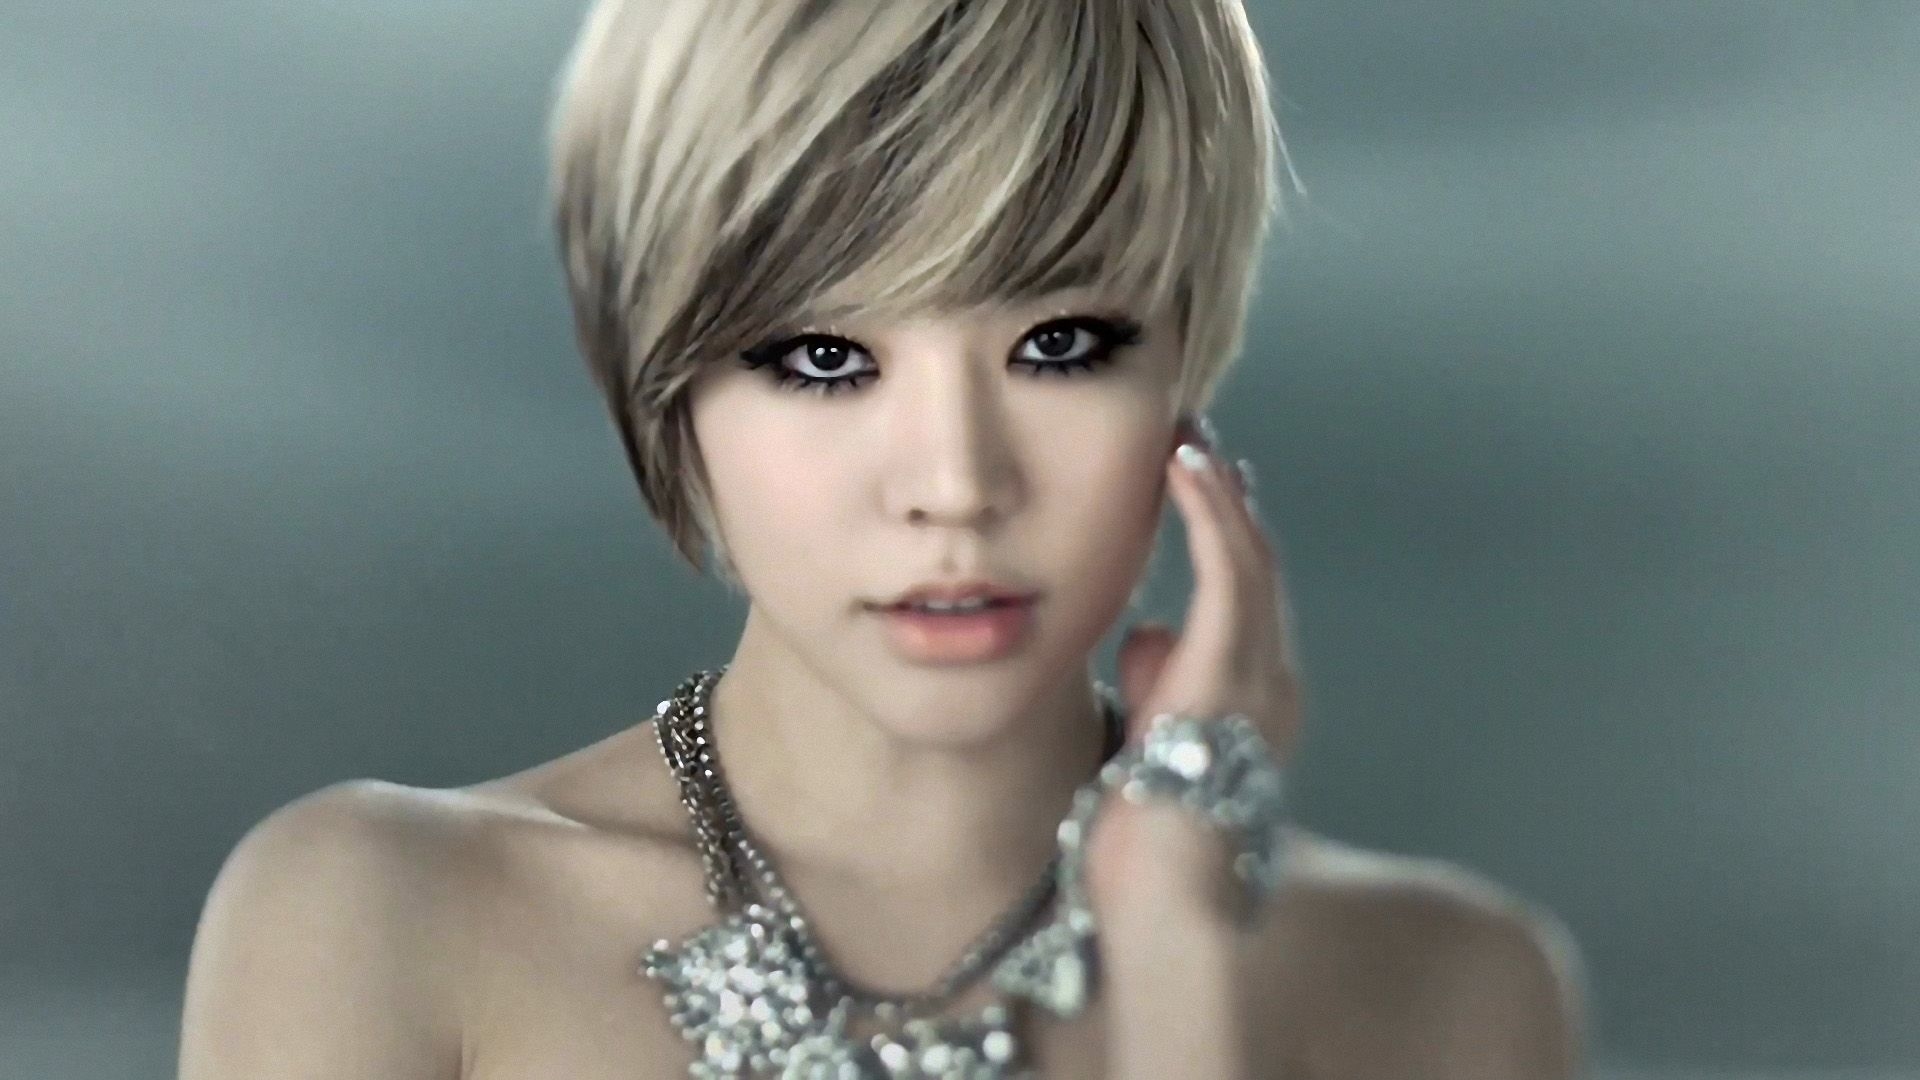 Short Blonde+Black Hairstyle. Sunny From Snsd. | Asian Hair pertaining to Superb Asian Short Hairstyles For Fine Hair